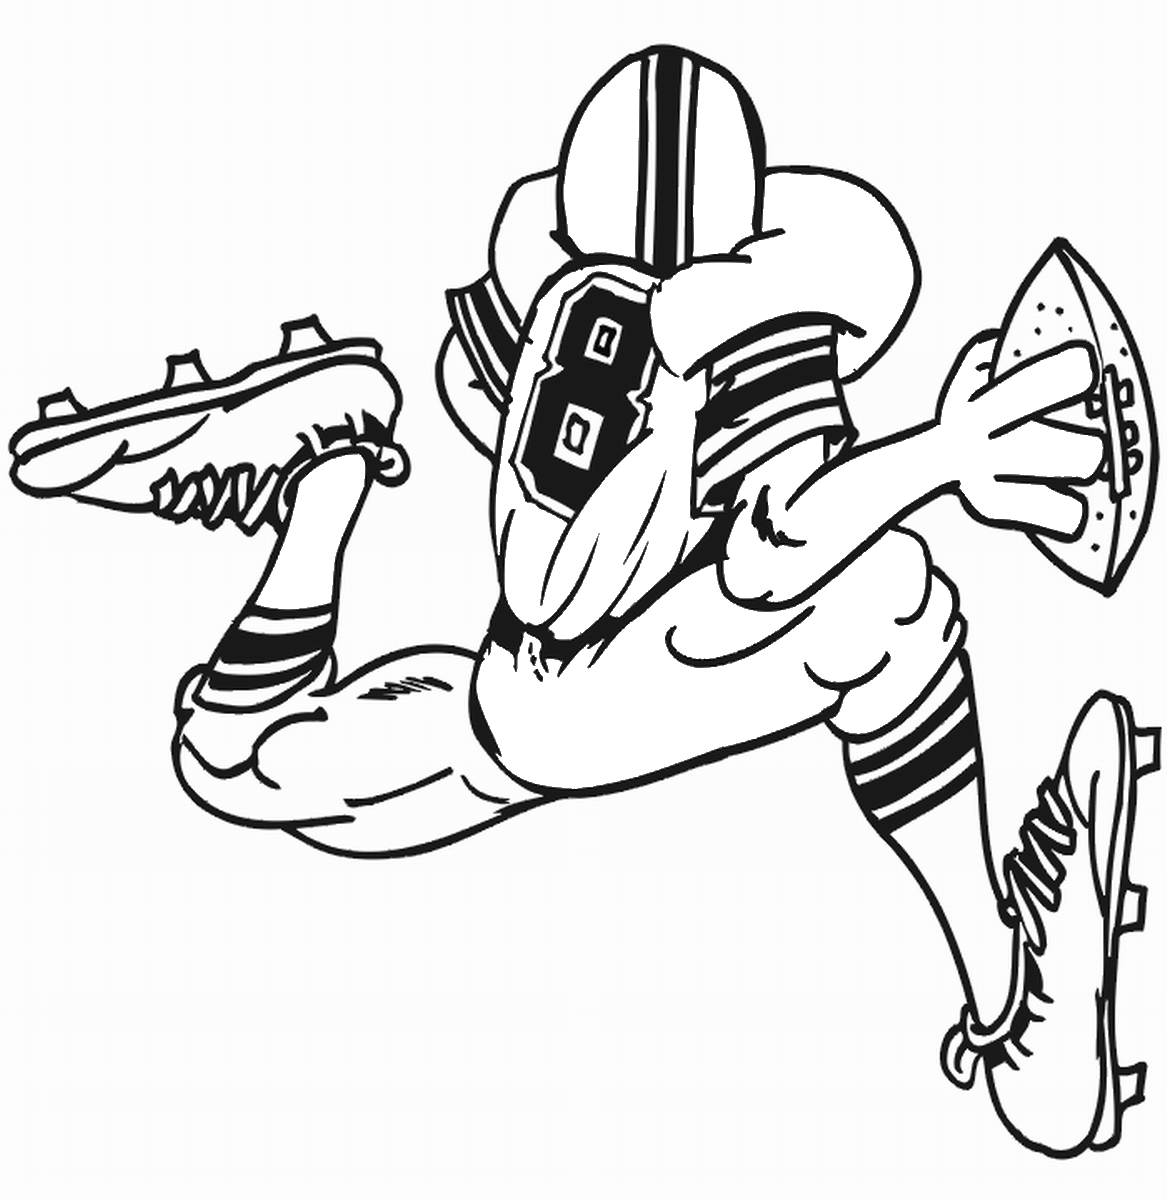 Football Coloring Pages for boys football_coloring18 Printable 2020 0383 Coloring4free